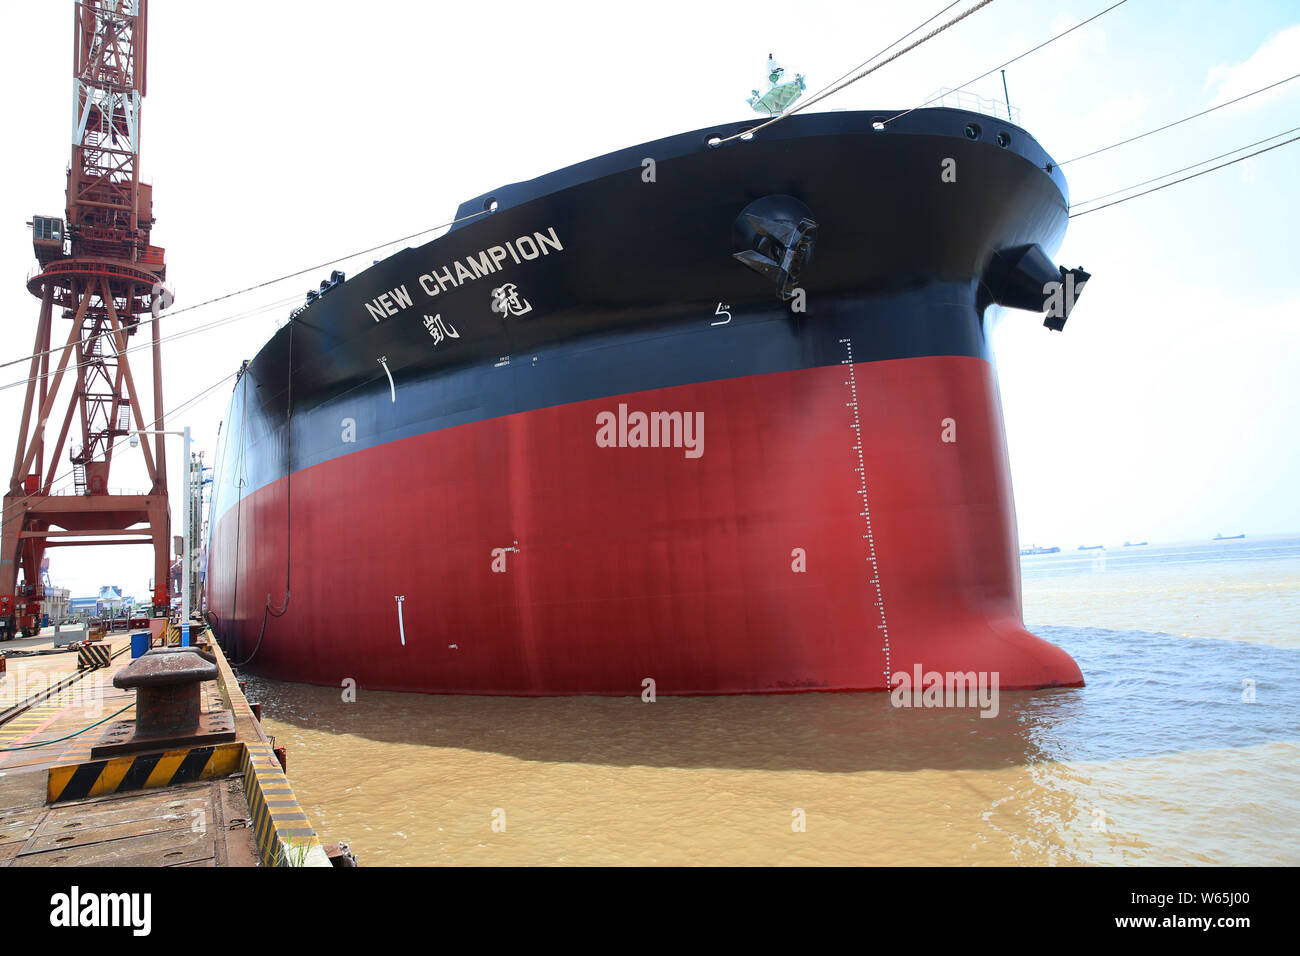 The new 308,000 dwt very large crude carrier (VLCC) "New Champion"  constructed by shipbuilder Nantong Cosco KHI Ship Engineering (NACKS) is  pictured a Stock Photo - Alamy